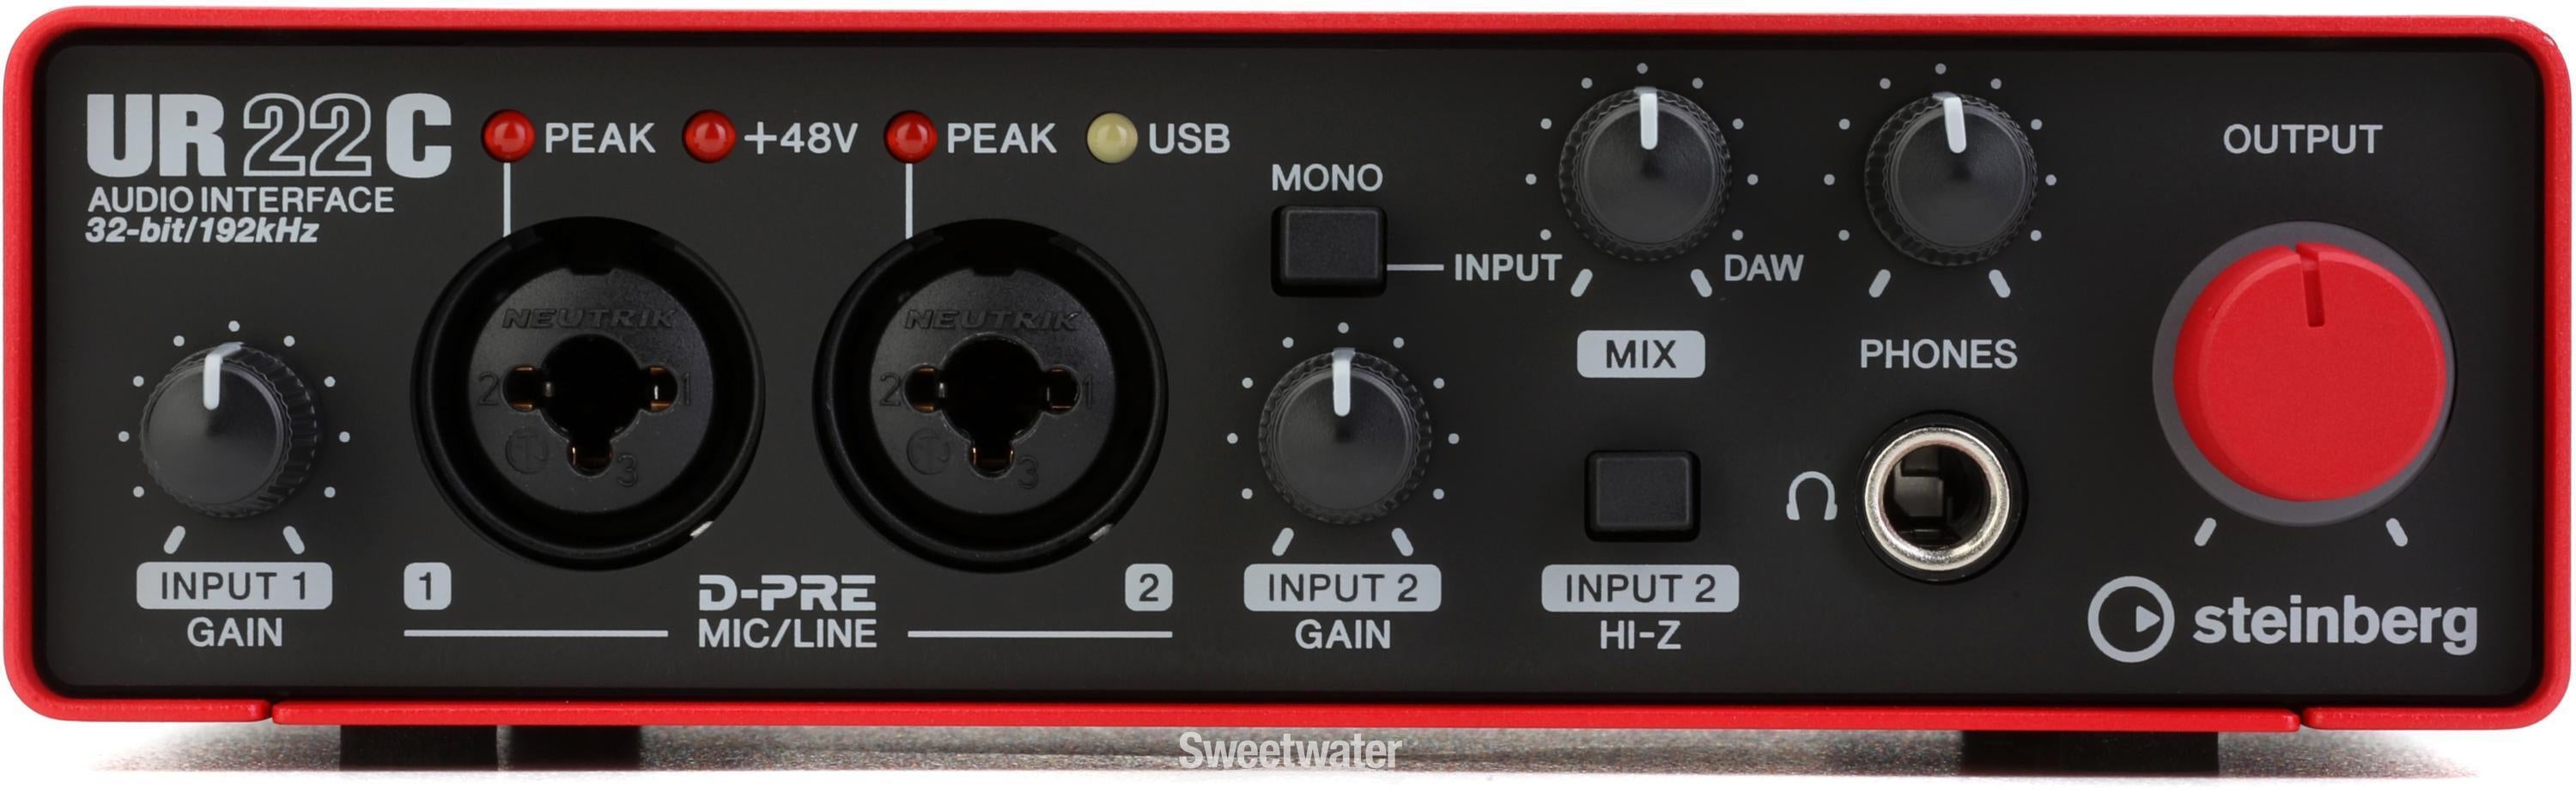 Steinberg UR22C Recording Pack with USB 3.1 Audio Interface 